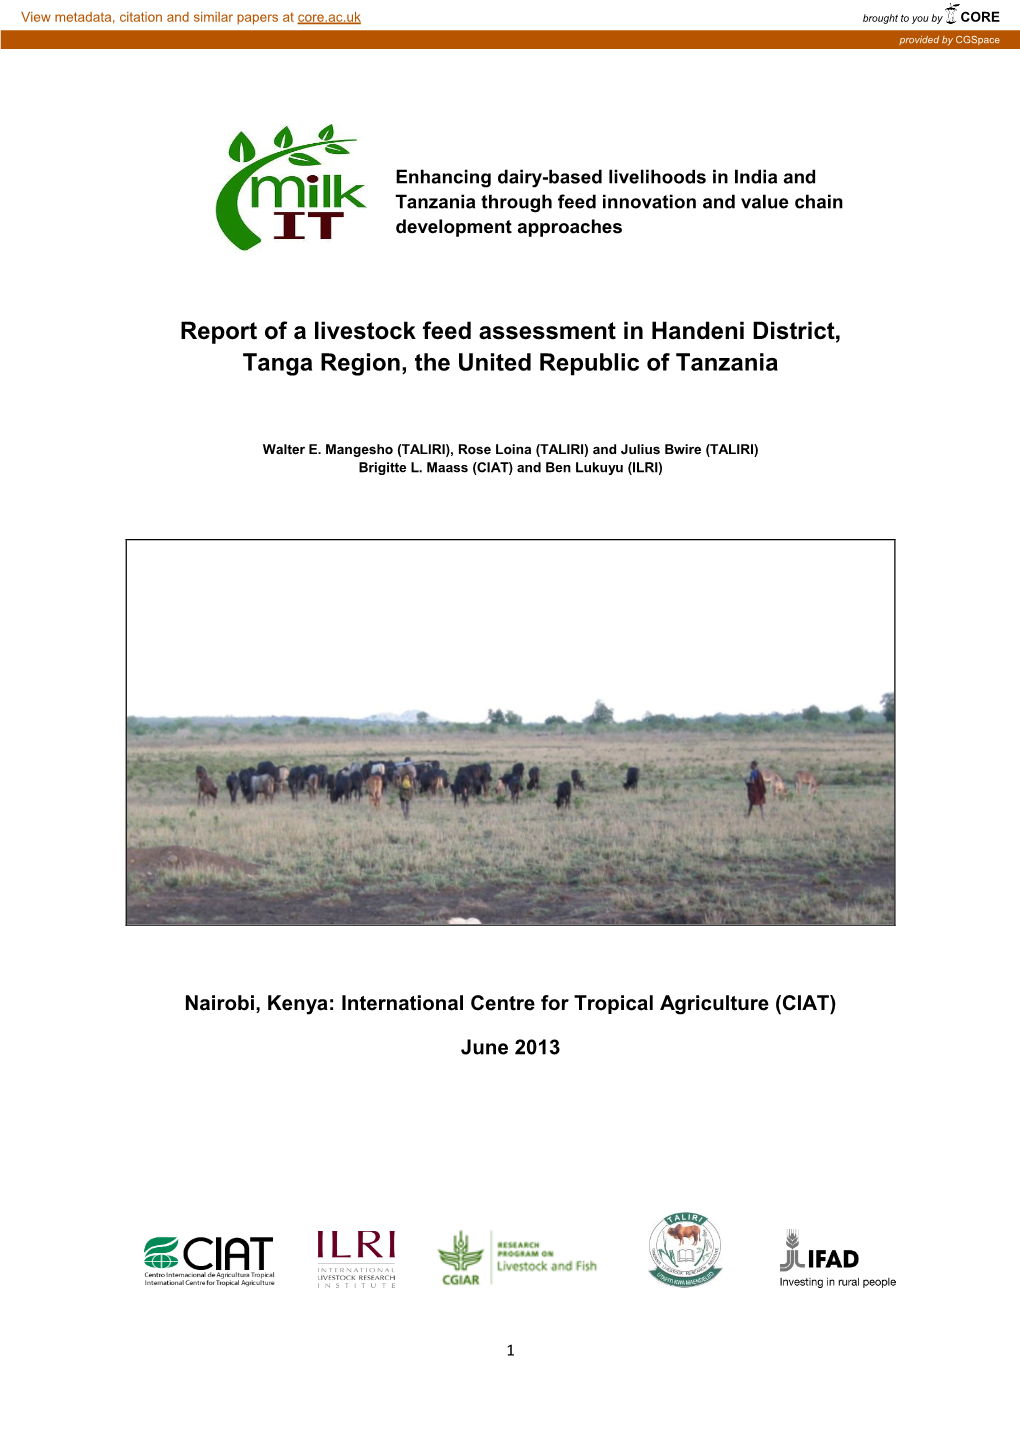 Report of a Livestock Feed Assessment in Handeni District, Tanga Region, the United Republic of Tanzania